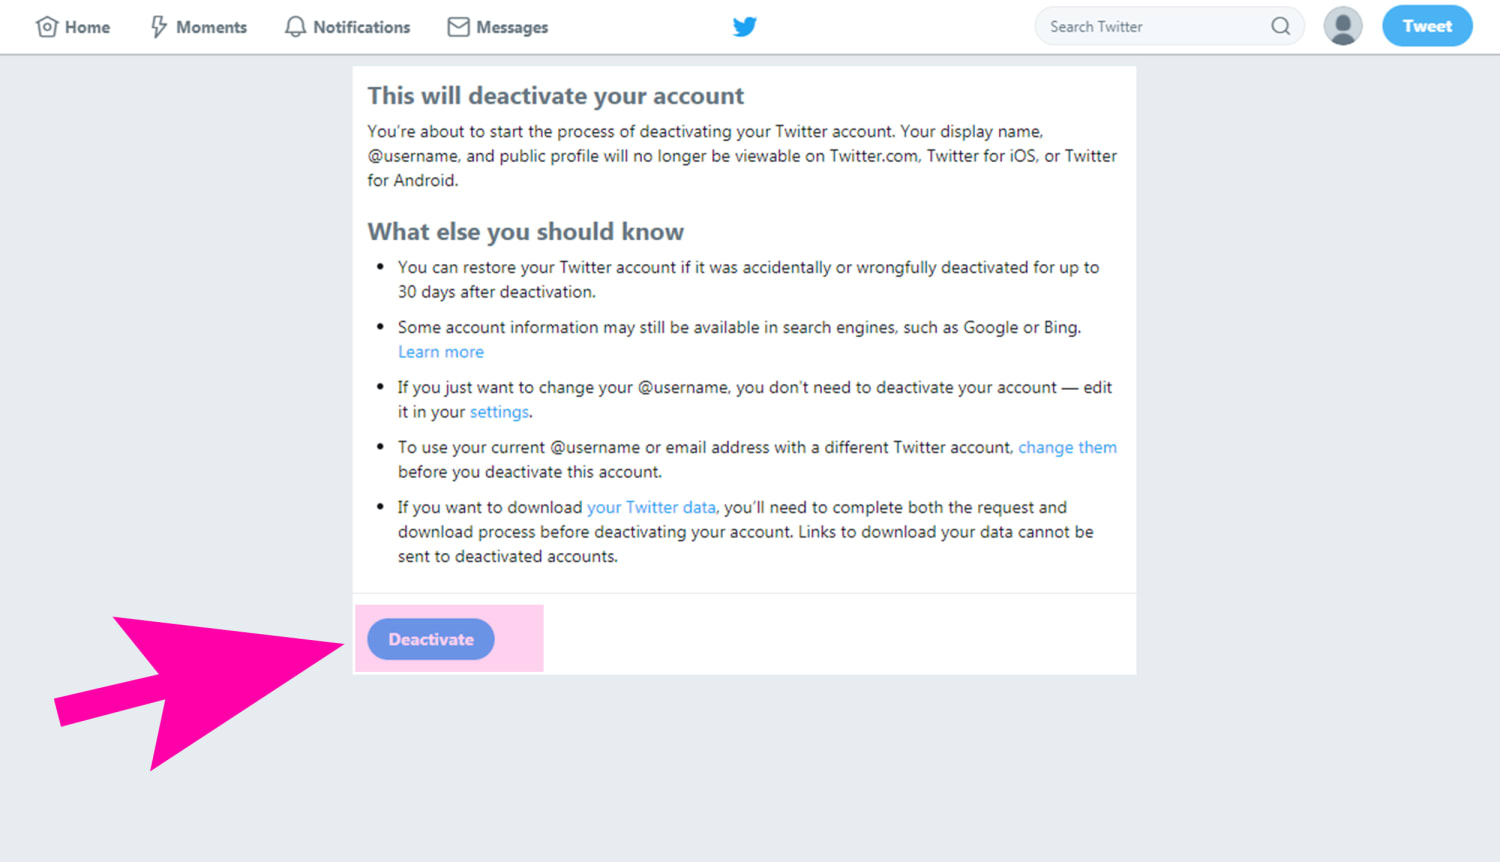 How to delete a Twitter account or deactivate it in 9